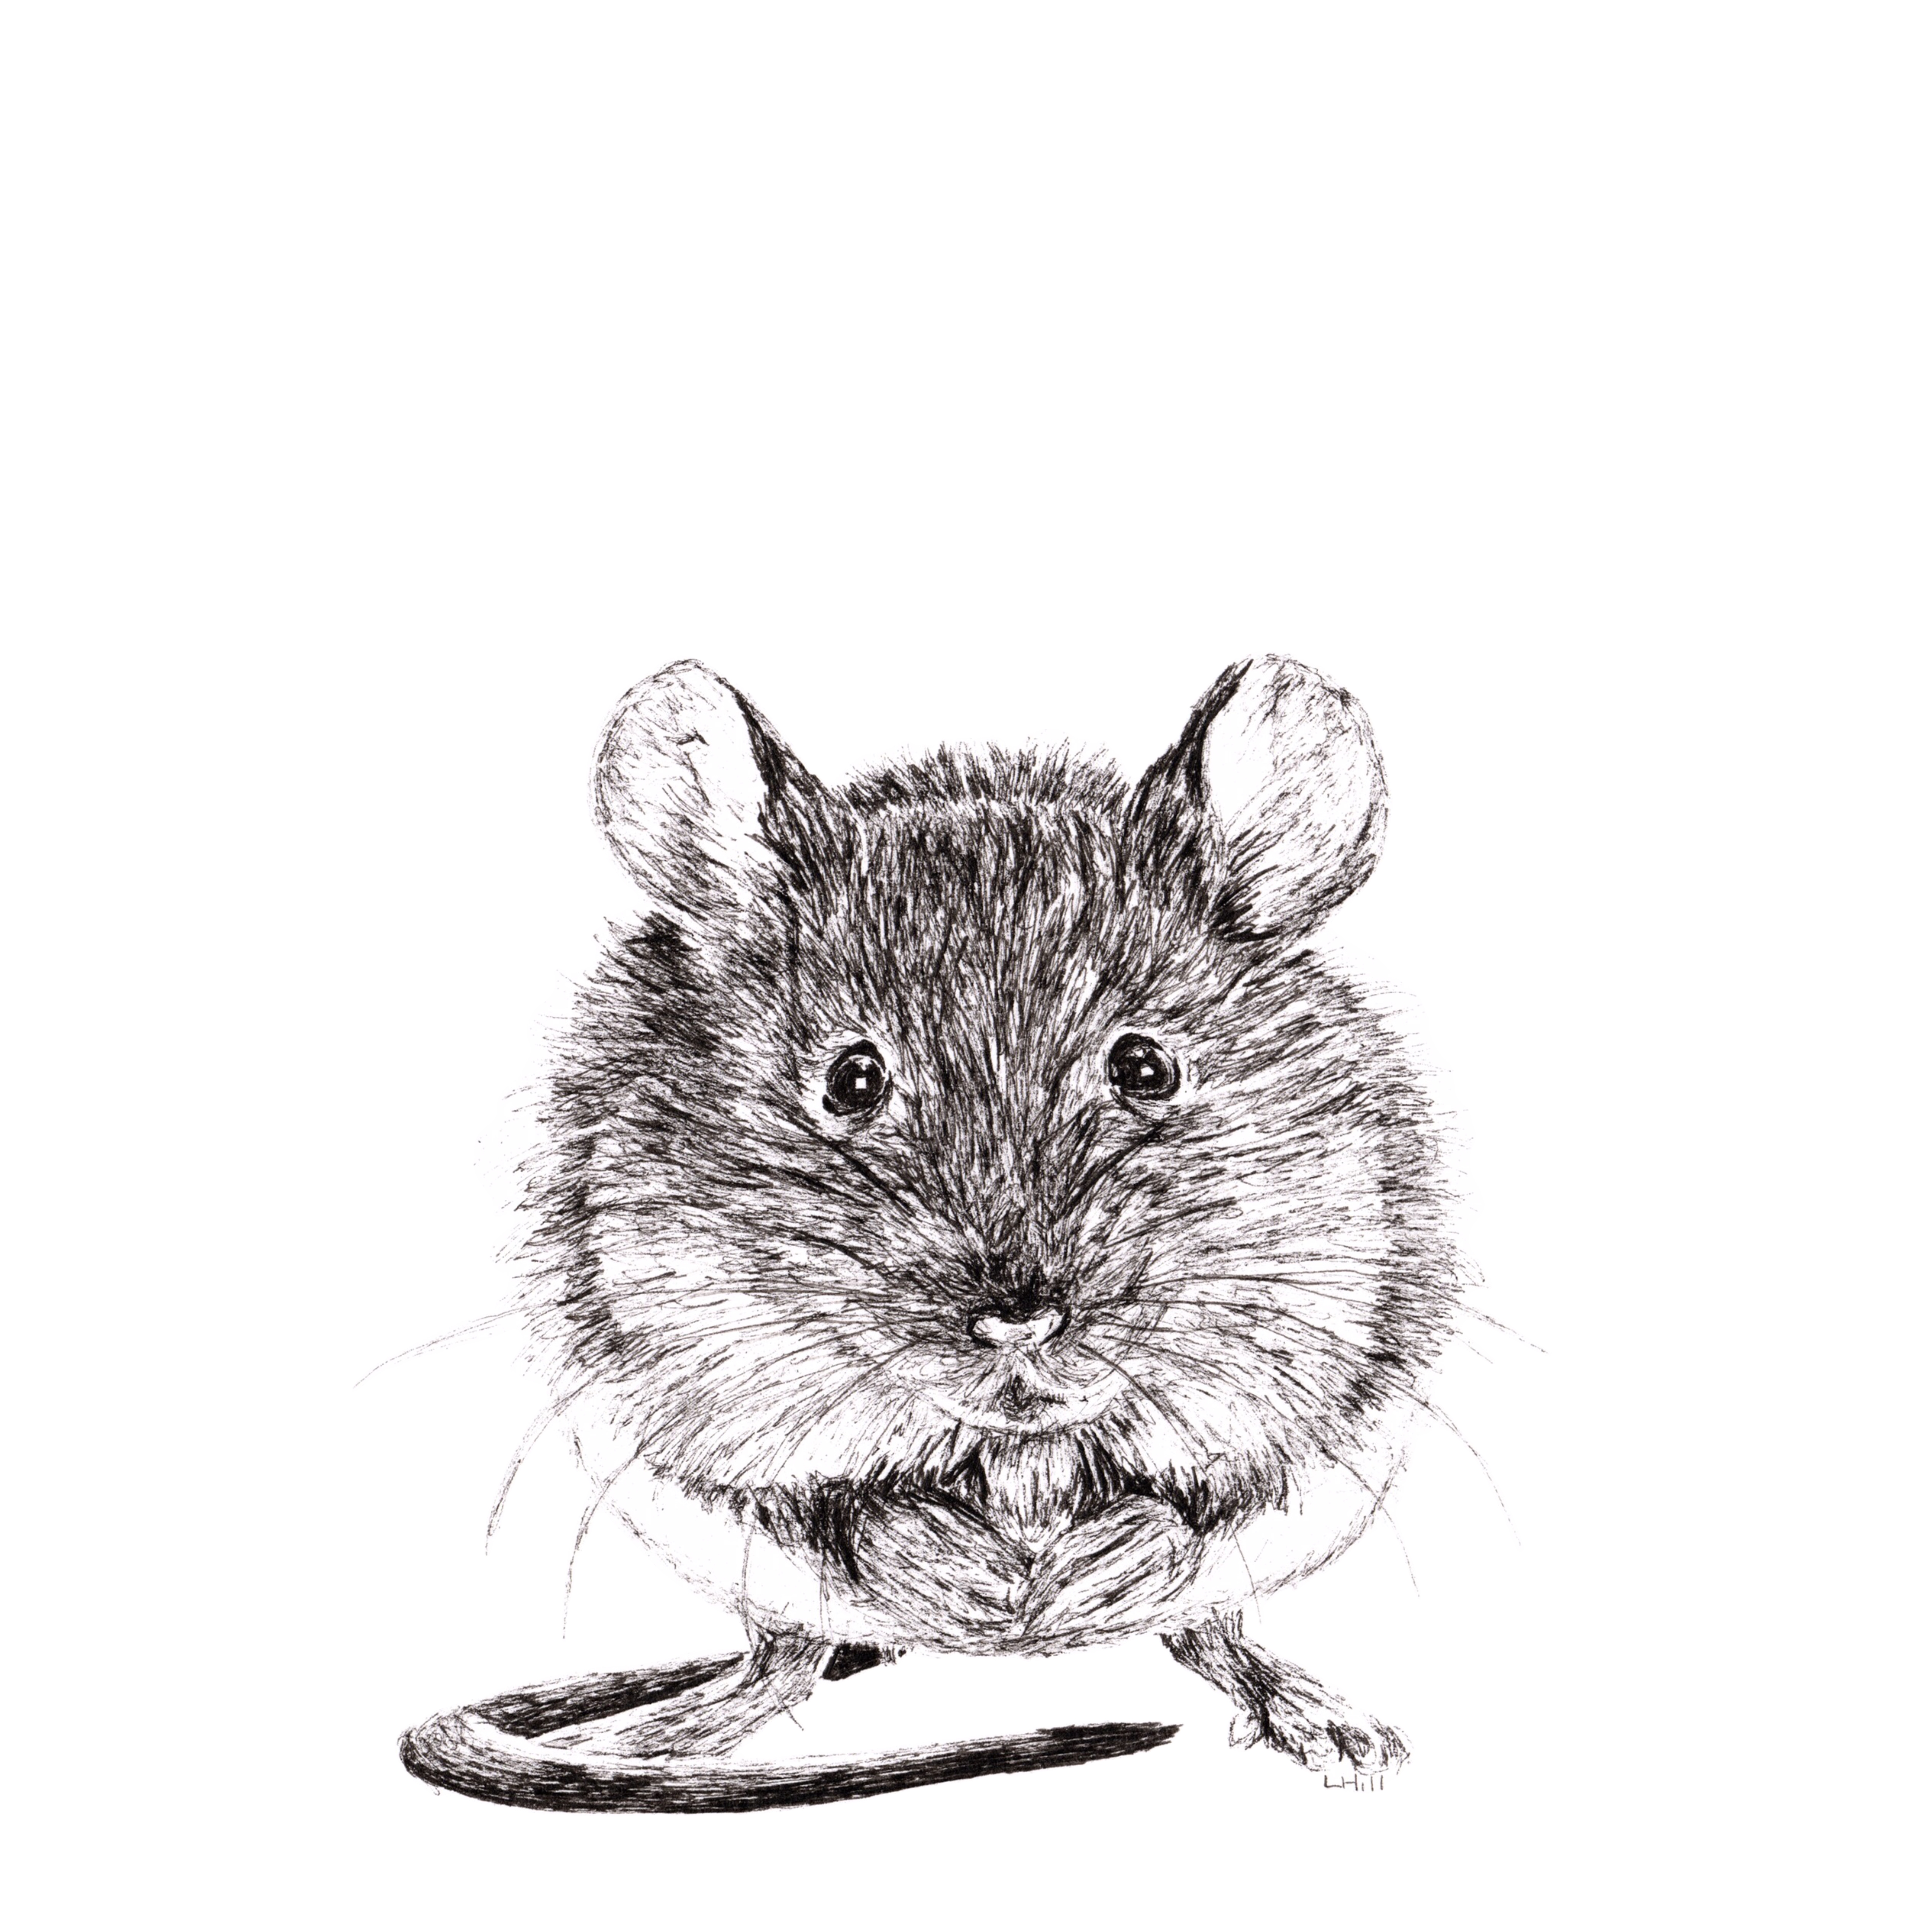 Mouse pen and ink illustration by Louisa Hill